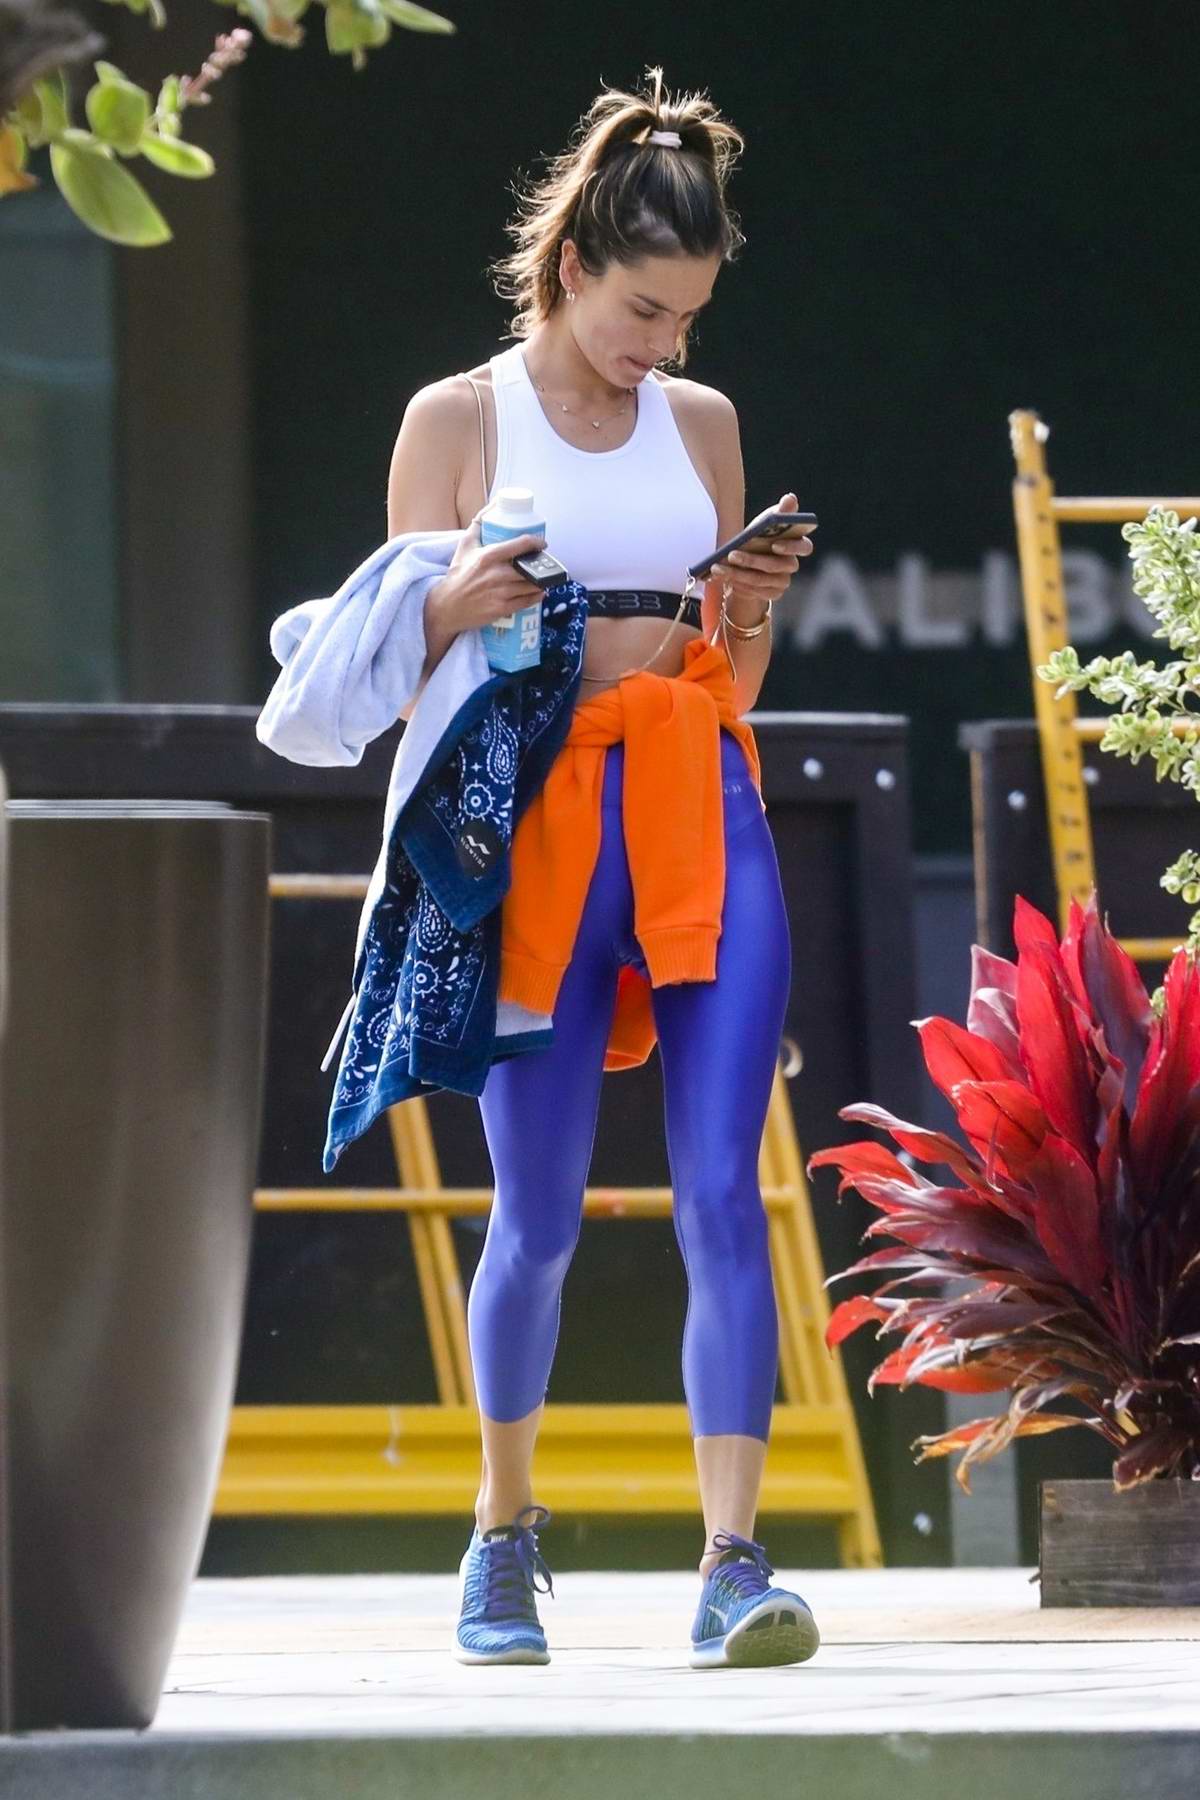 Alessandra Ambrosio looks incredible in bright blue leggings and